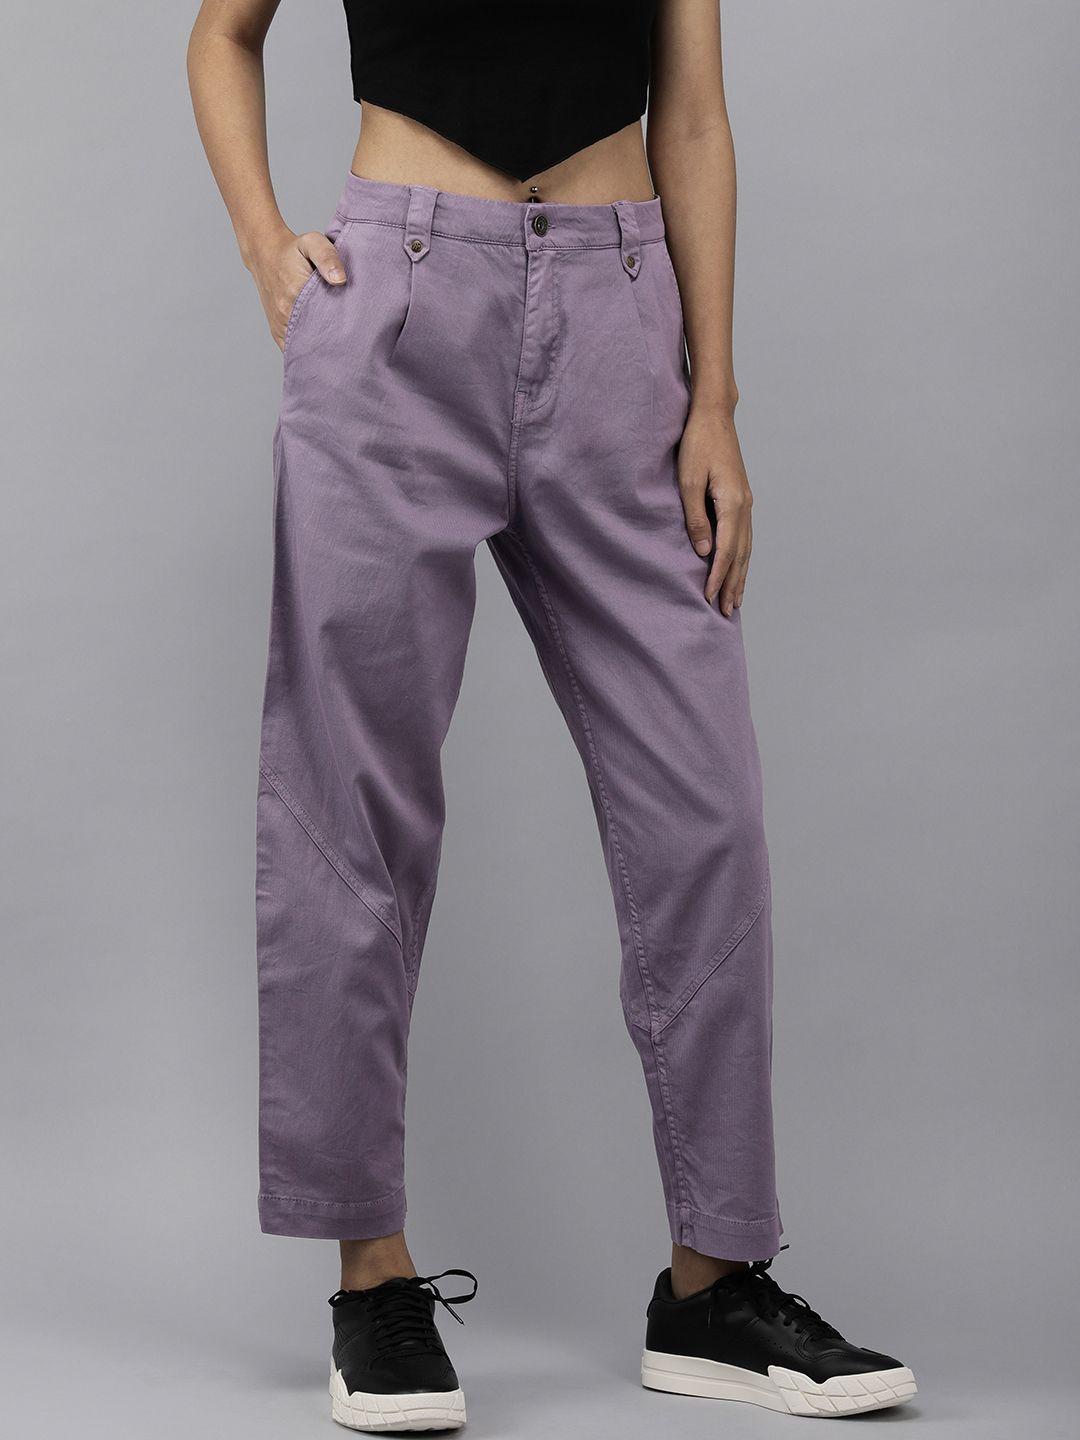 the roadster lifestyle co women purple solid trousers